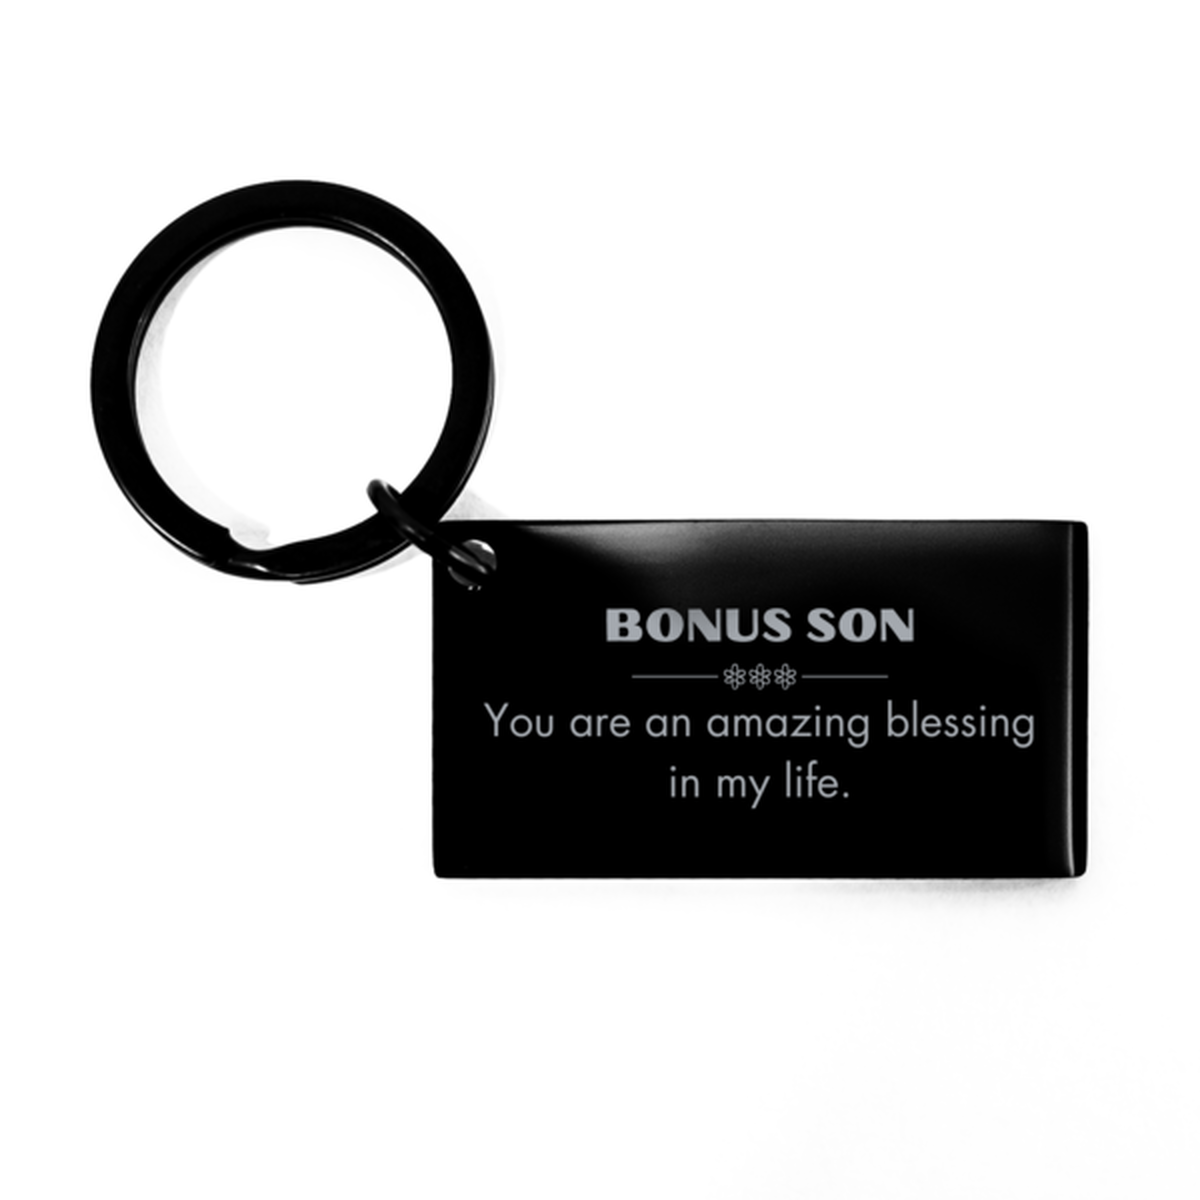 Bonus Son Keychain, You are an amazing blessing in my life, Thank You Gifts For Bonus Son, Inspirational Birthday Christmas Unique Gifts For Bonus Son